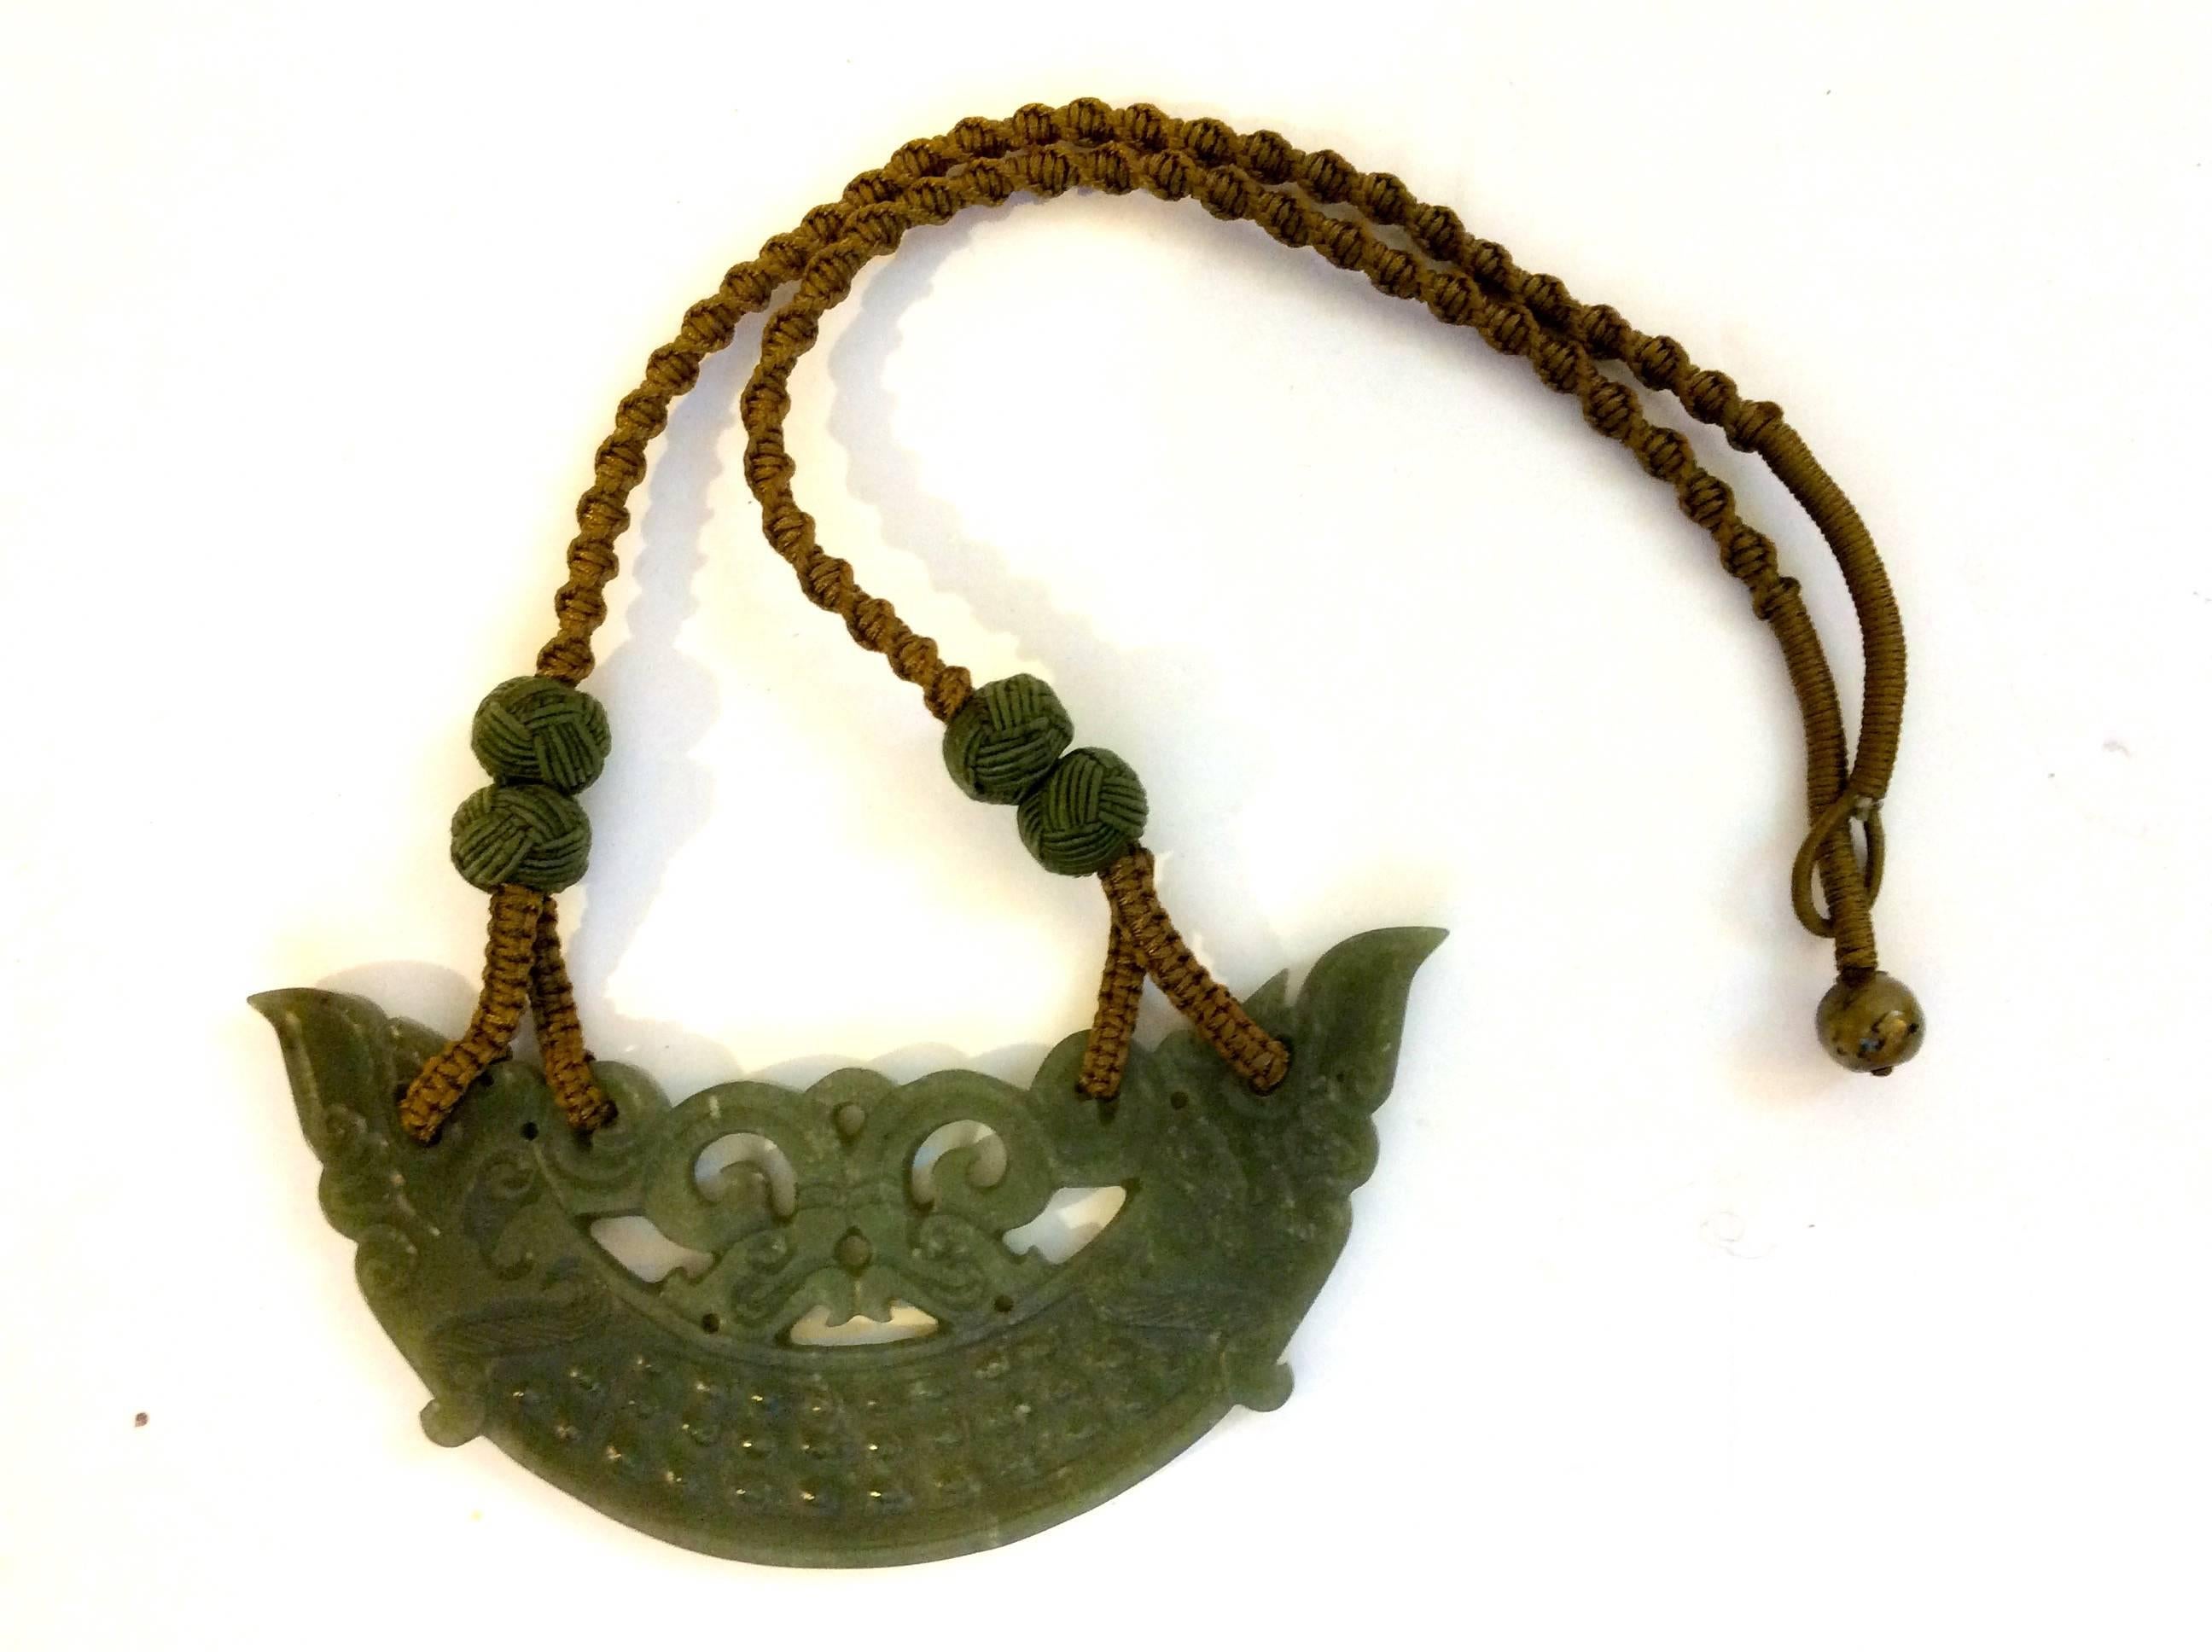 Presented here is an elaborate green jade necklace. The necklace is comprised of an curved section of green jade that has been intricately cut by hand. The necklace has a woven silk cord neck band. The necklace has a woven loop closure at the back